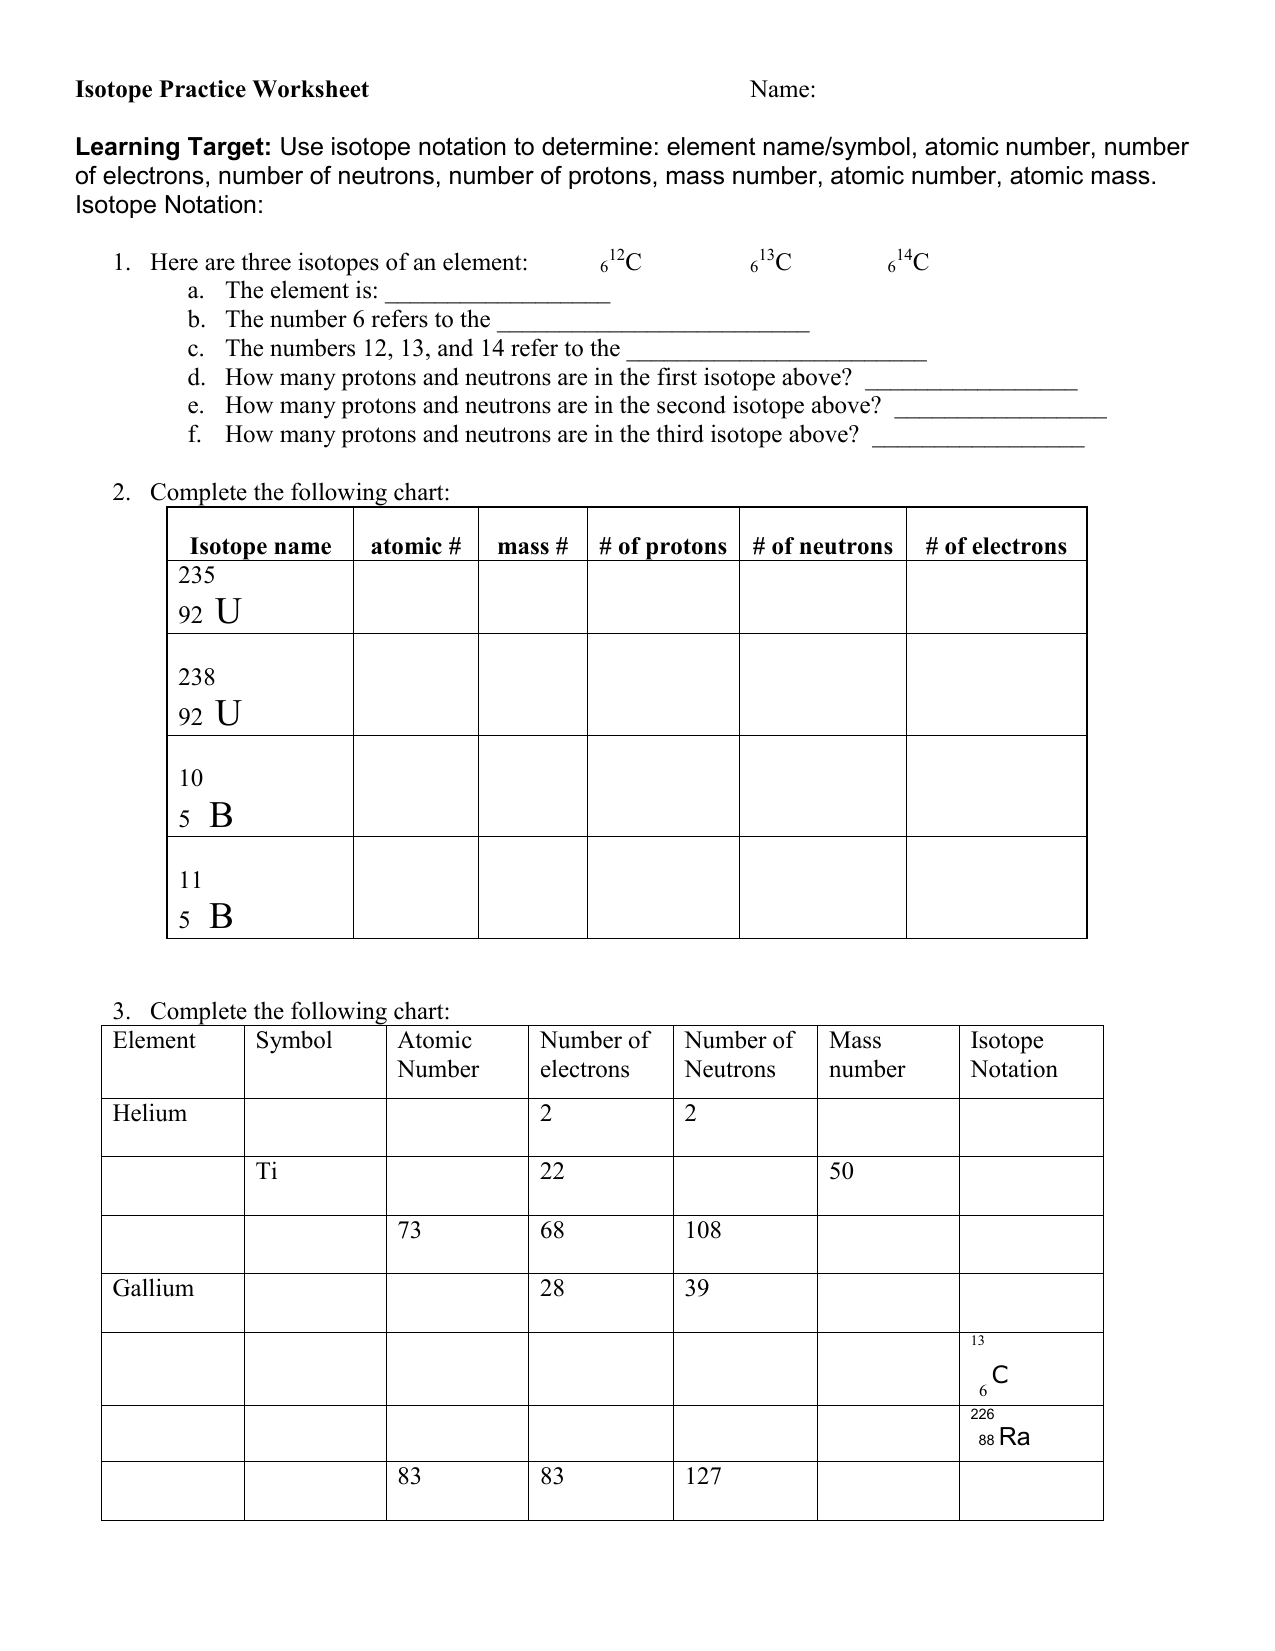 Isotope Practice  Radioactivity1 For Isotope Practice Worksheet